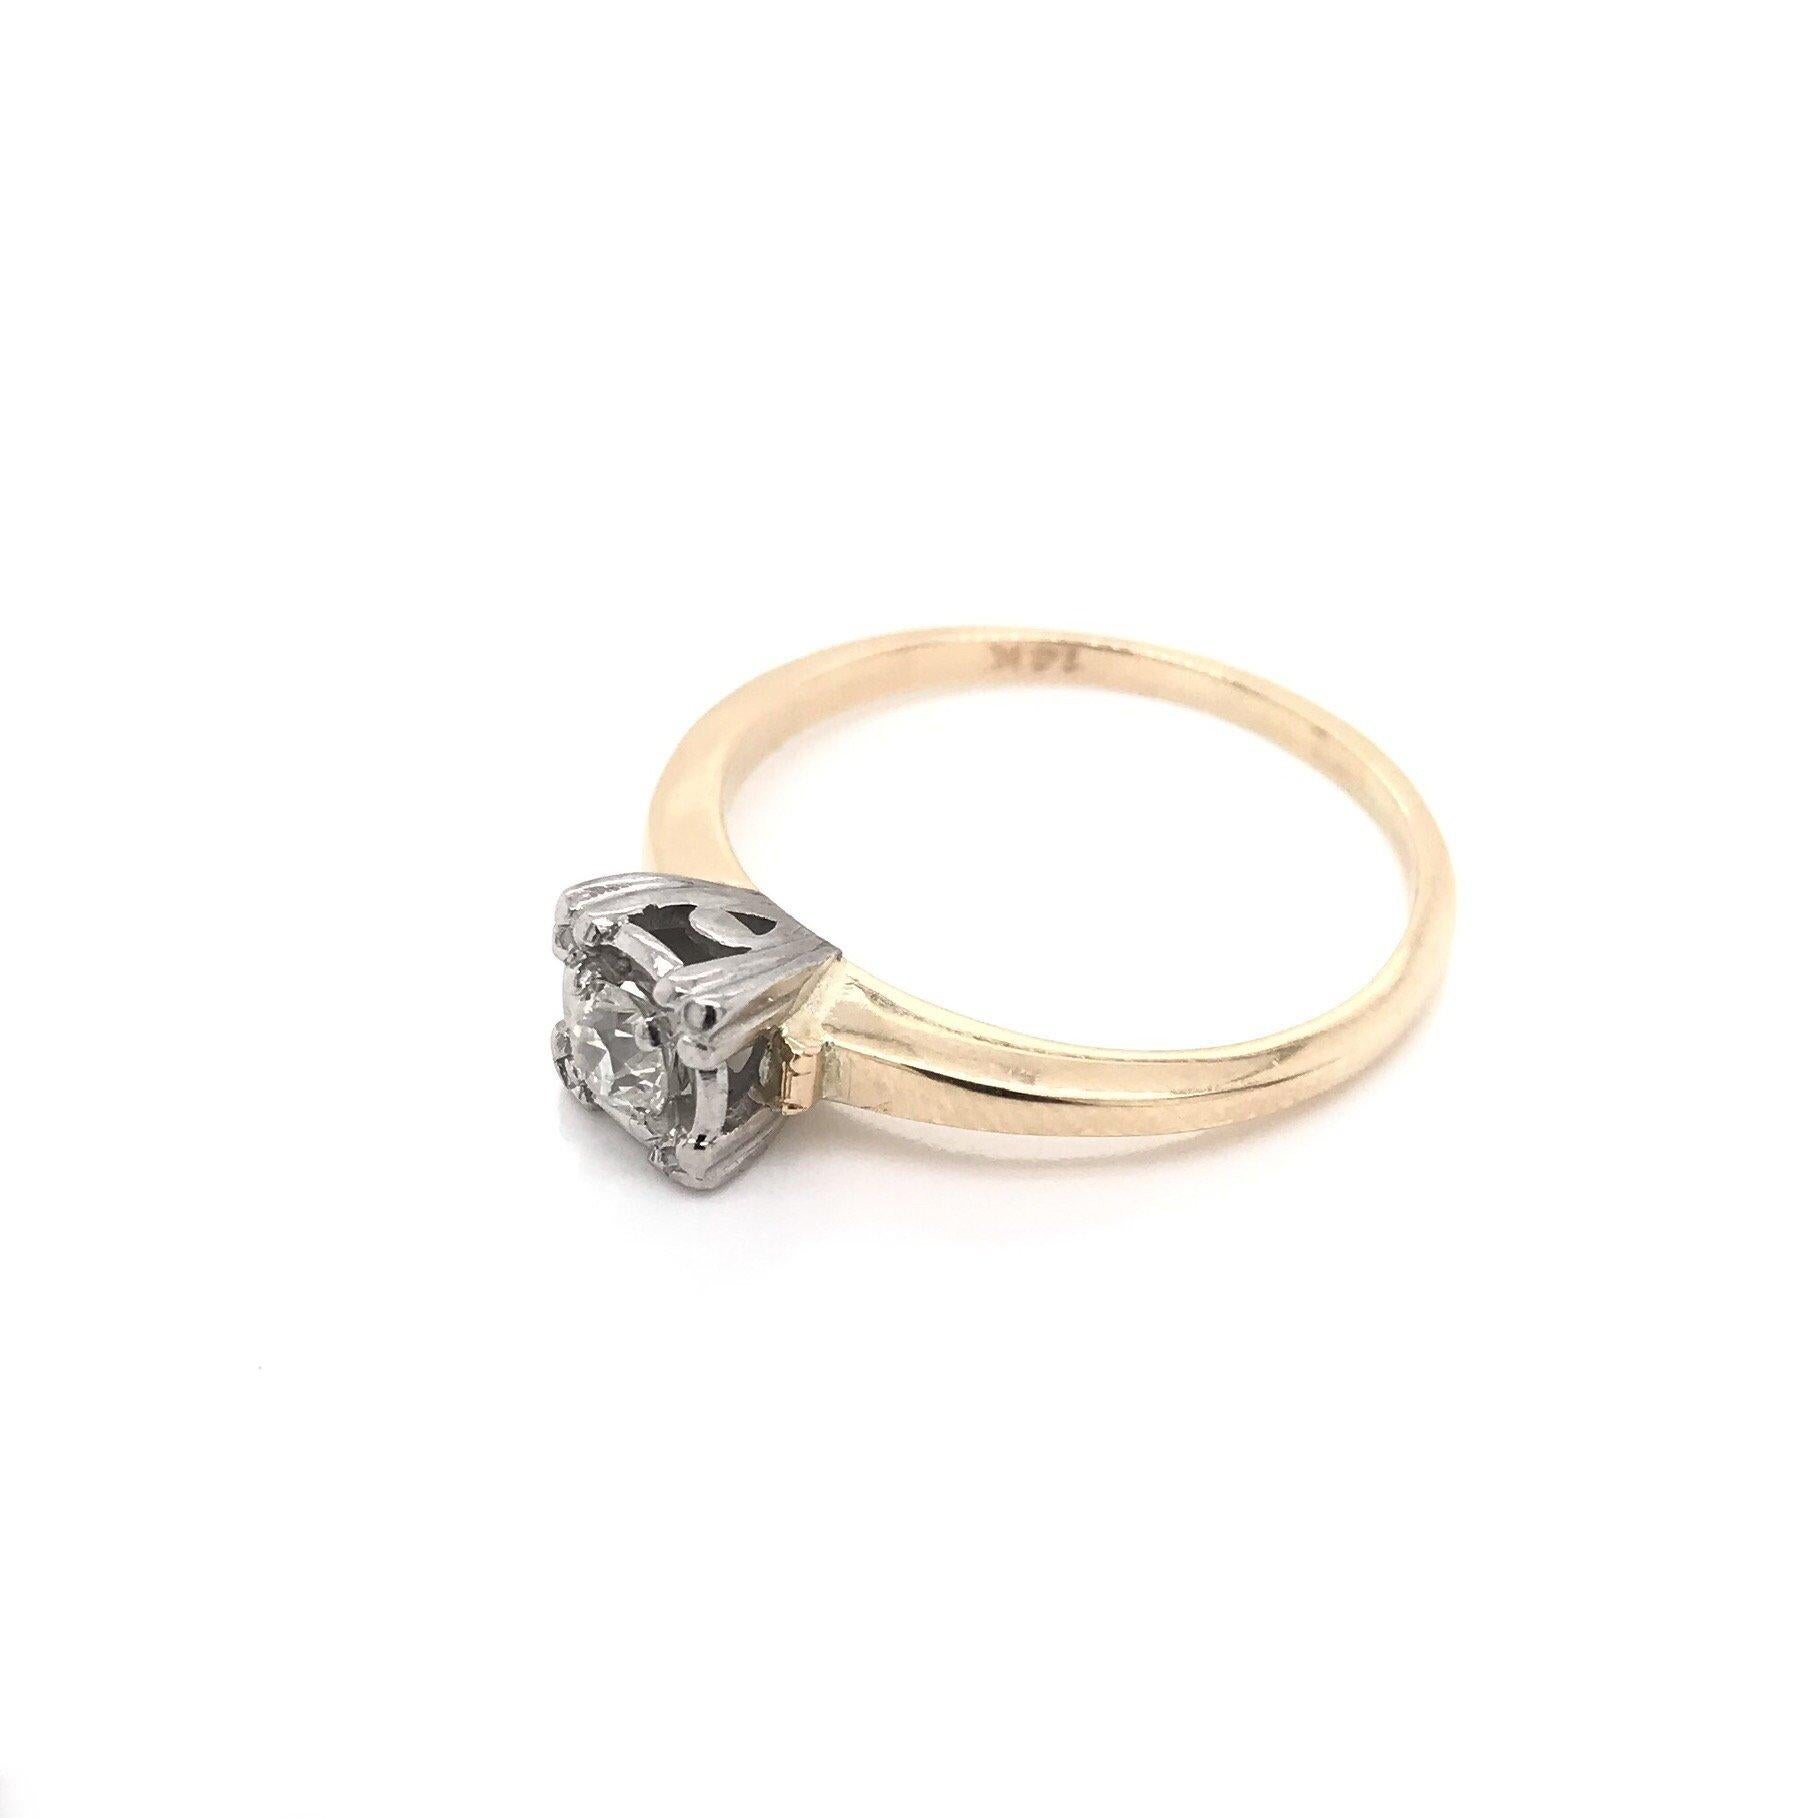 This Mid Century solitaire style ring was crafted sometime during the Retro design period ( 1940-1960 ). The setting is 14k gold with 14k white gold accents. The prong style is often referred to as a fishtail setting, common during this design